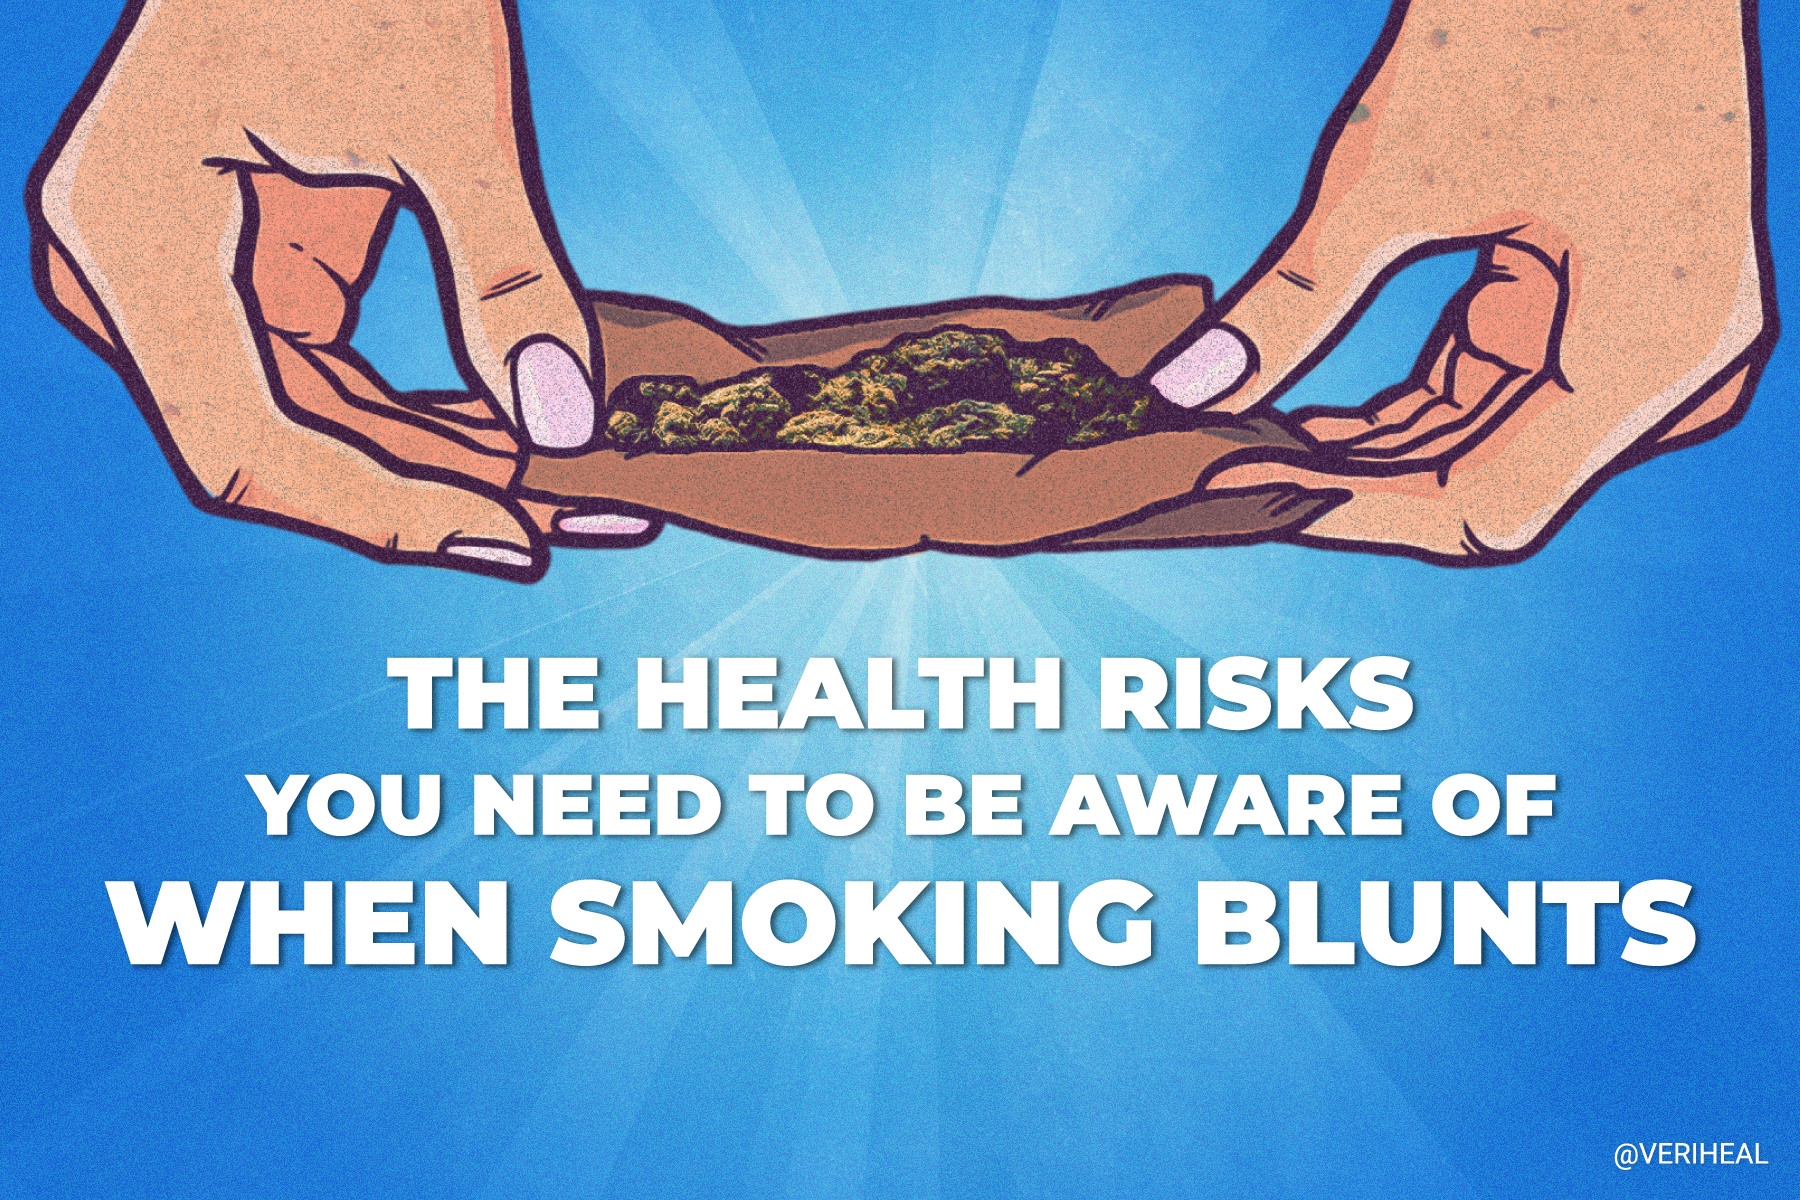 The Health Risks You Need to Be Aware of When Smoking Blunts